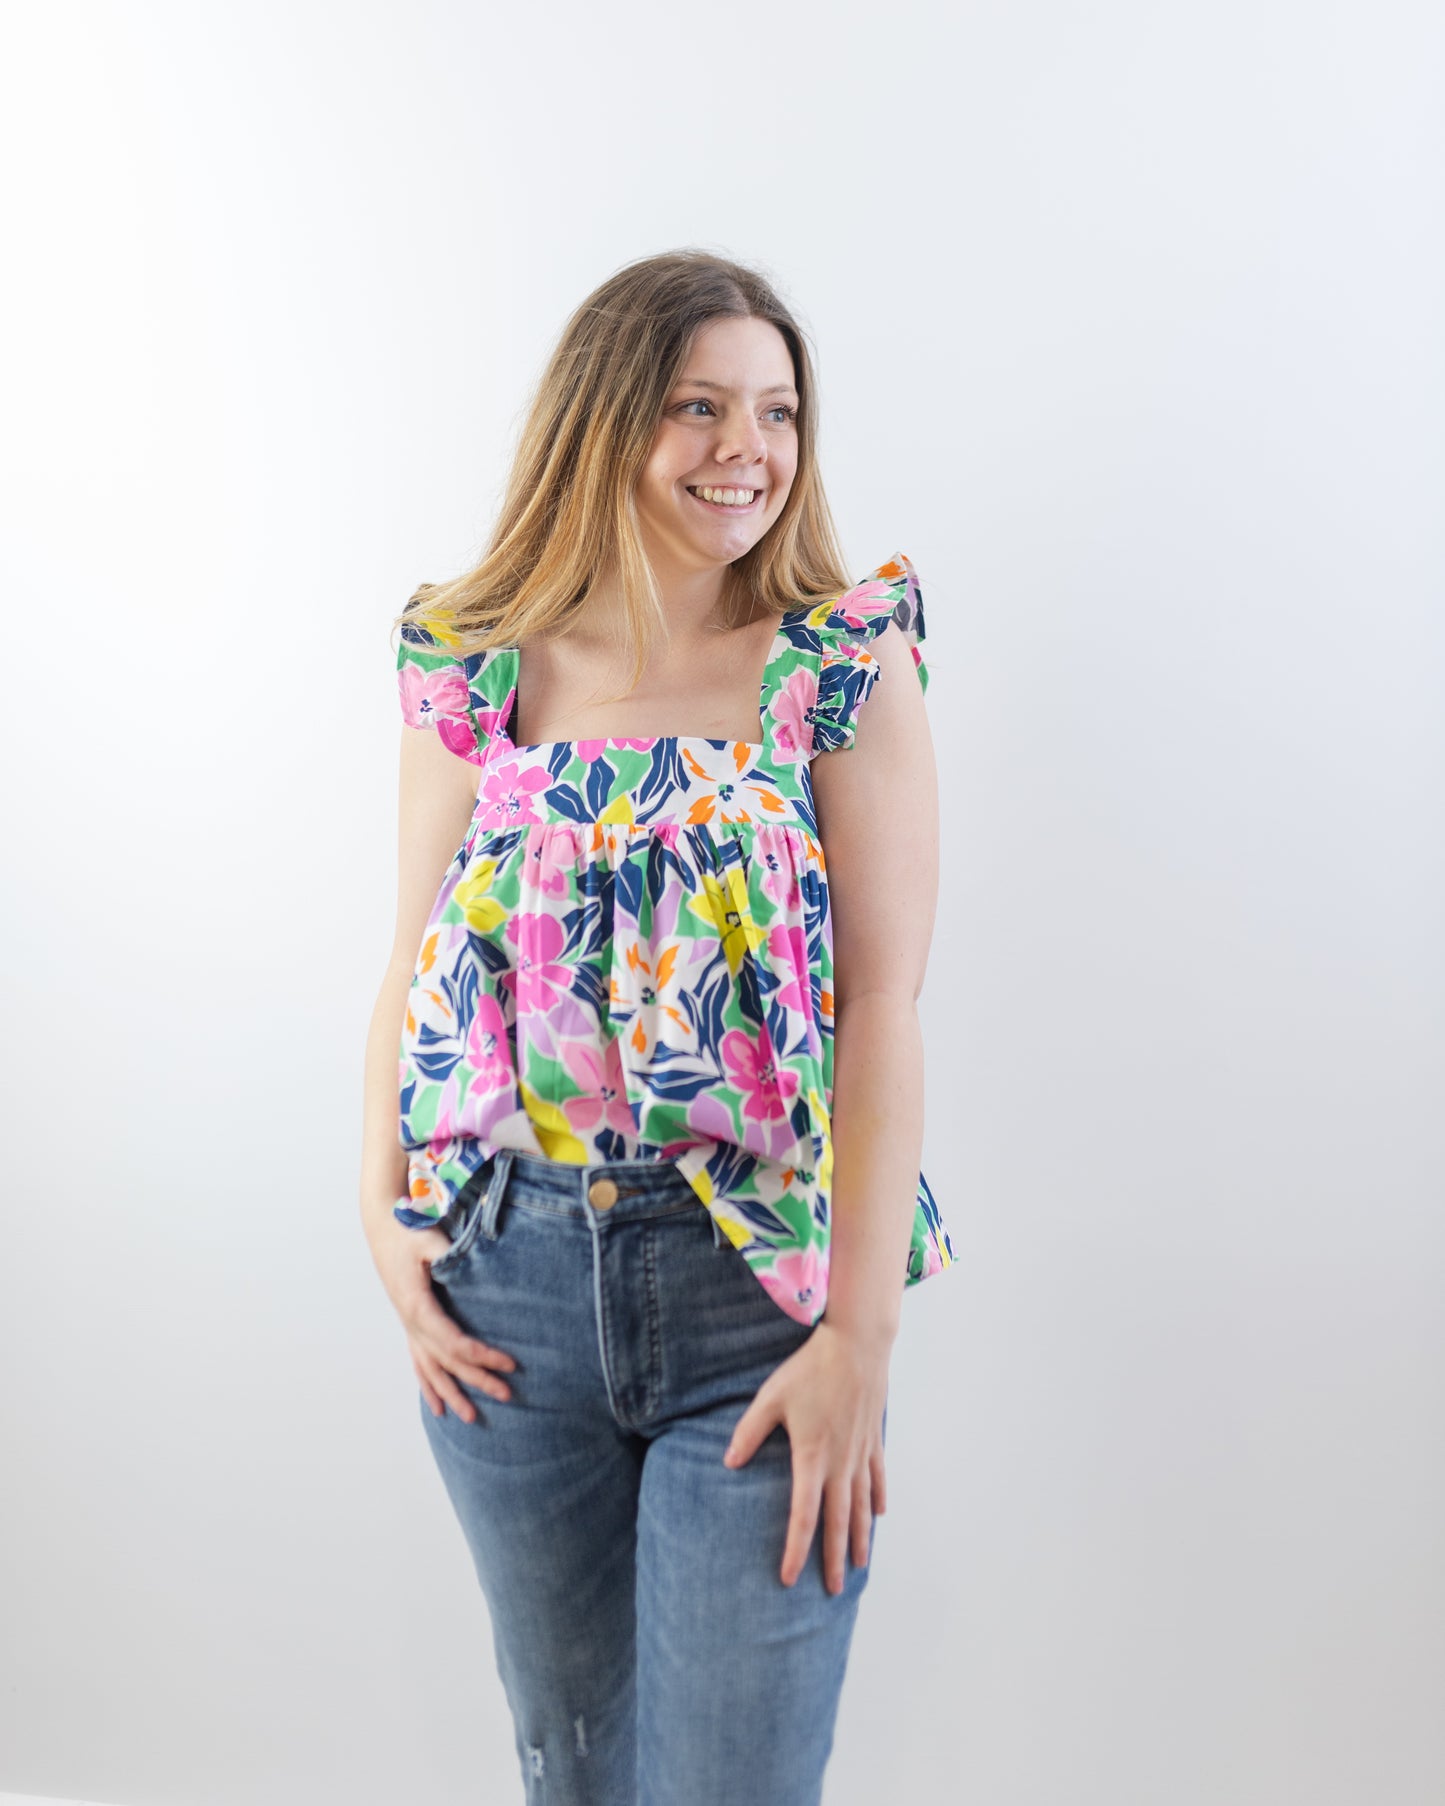 Hooked on You Floral Top